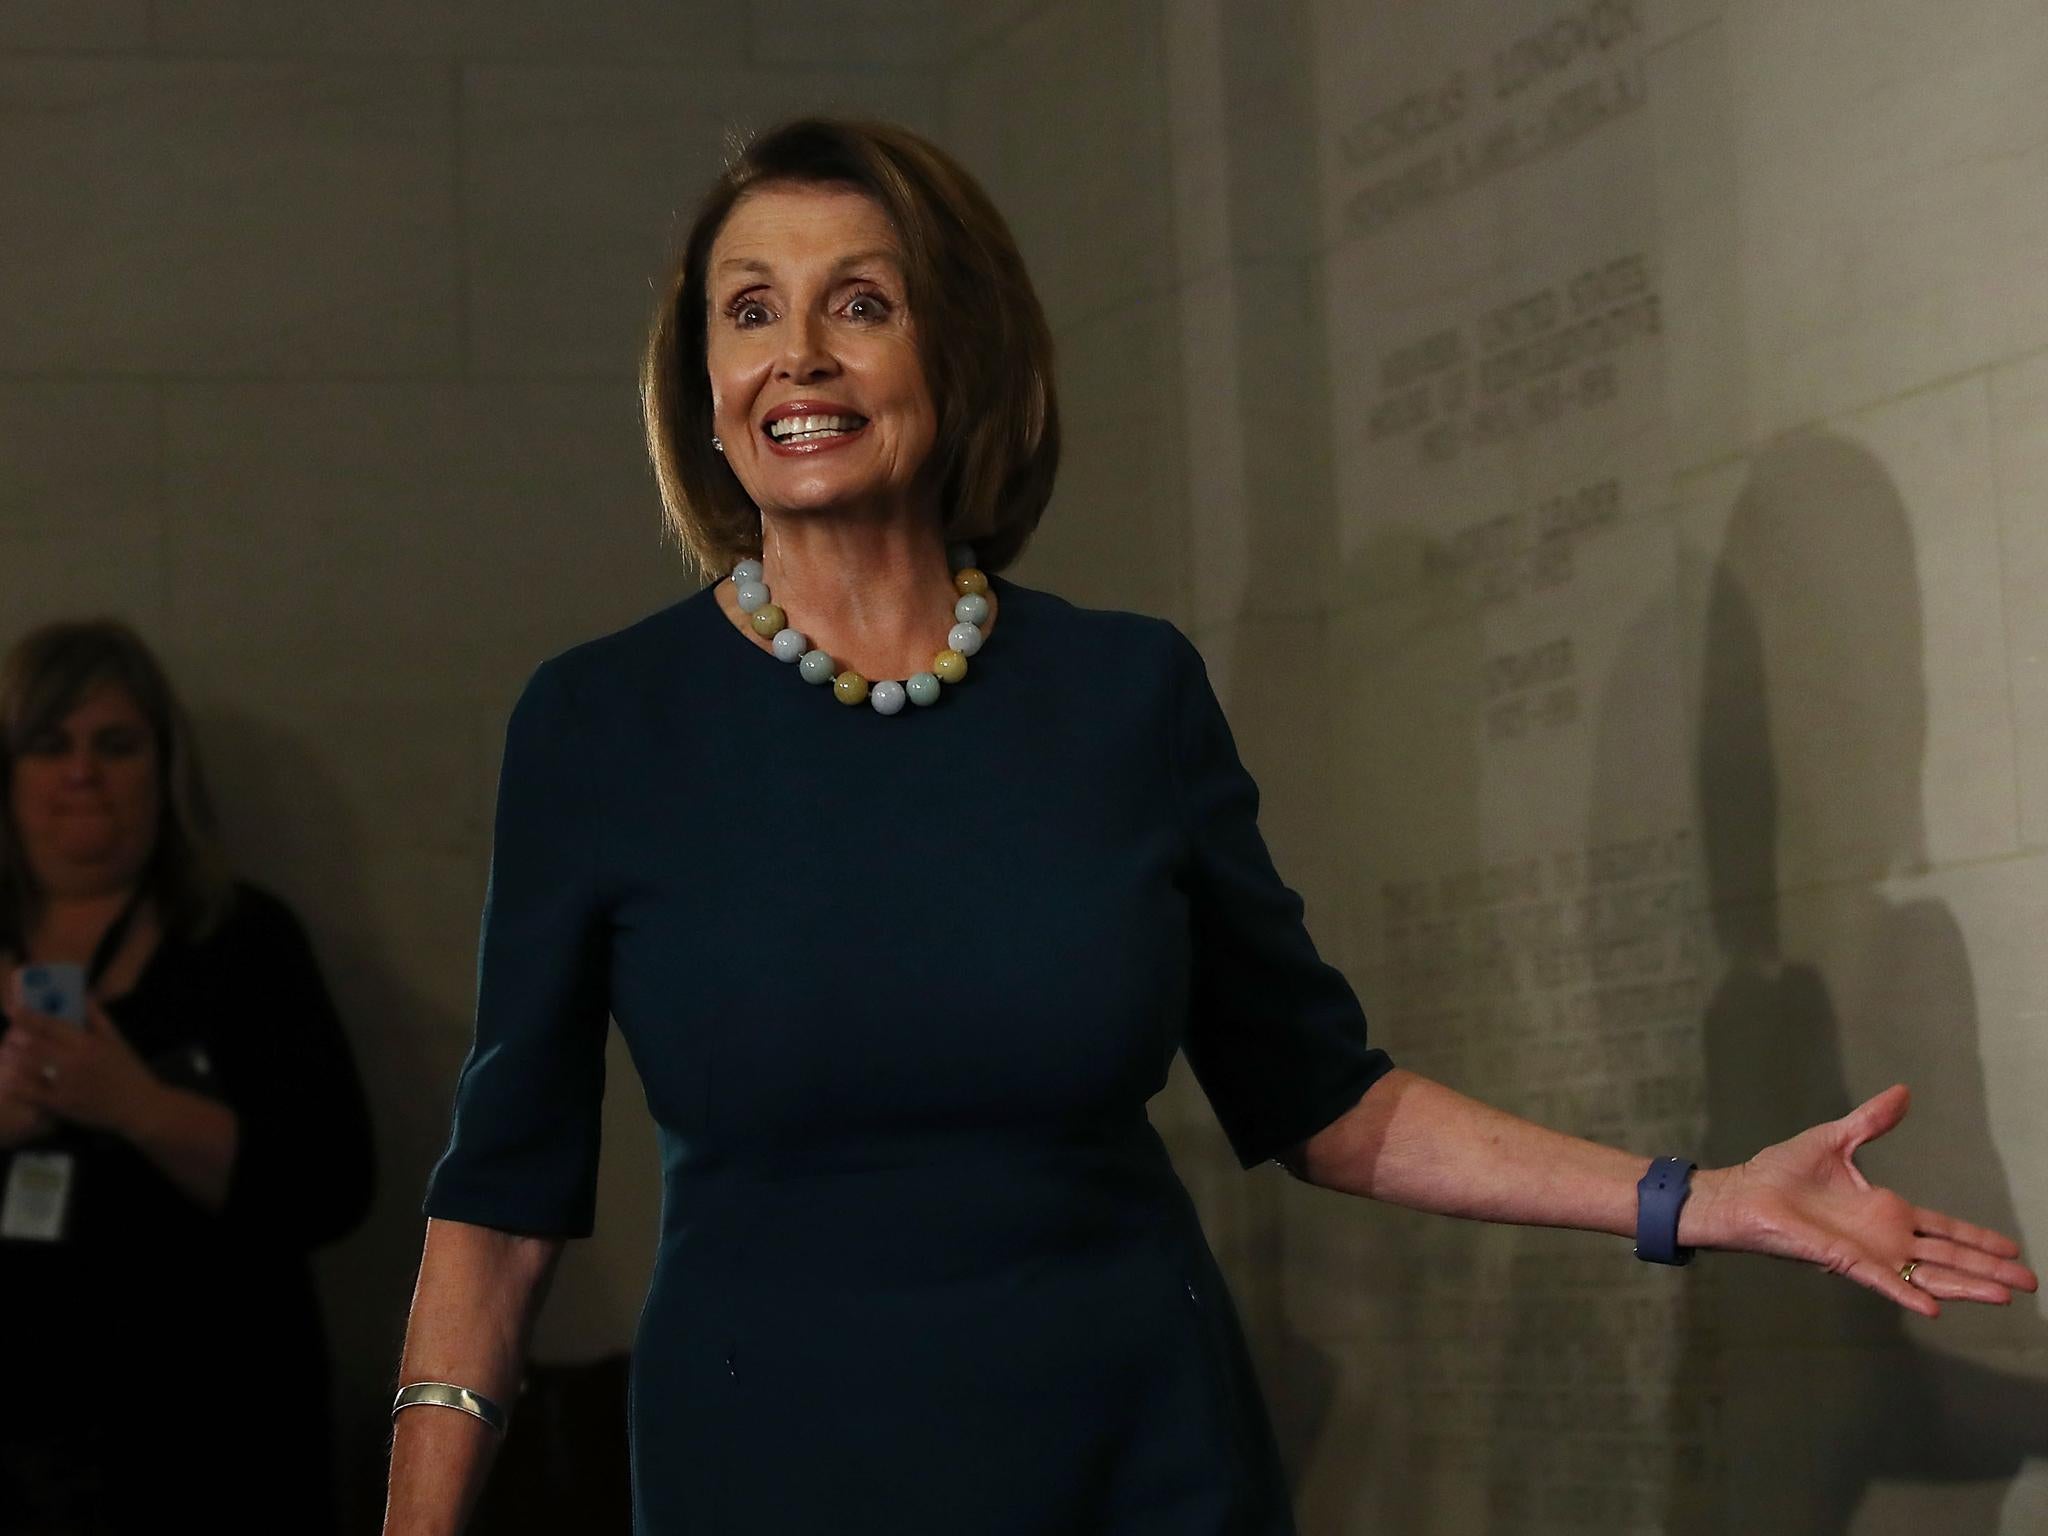 More than 30 per cent of Americans view House Minority Leader Nancy Pelosi favourably